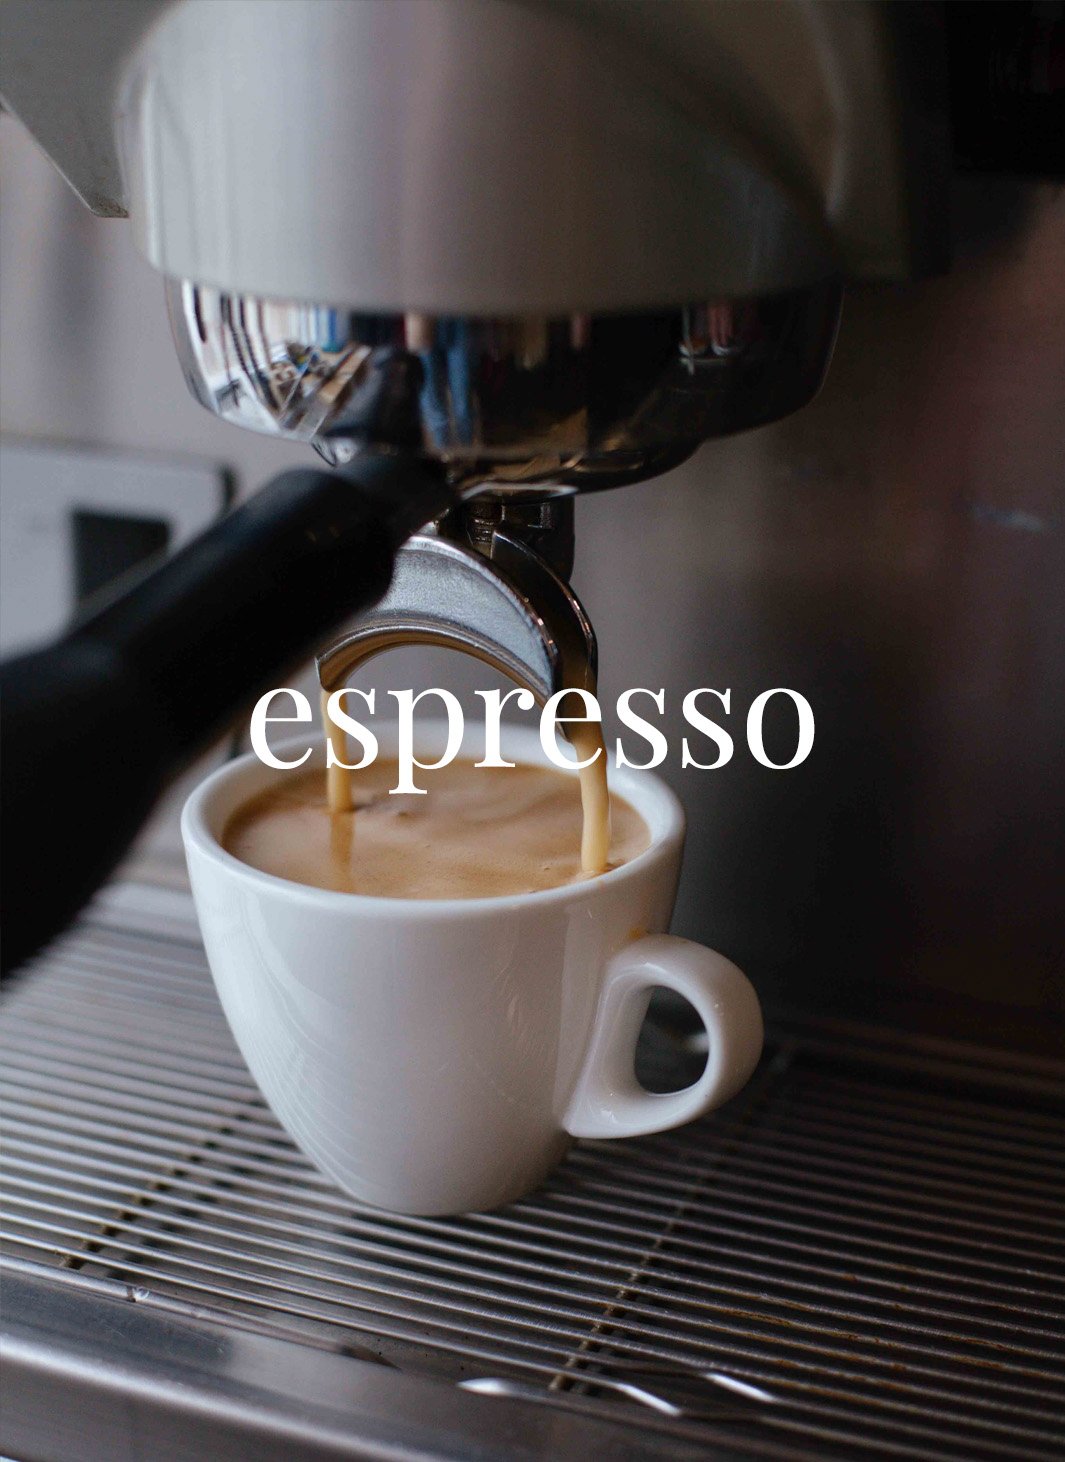 Espresso Subscription - 3 month gift